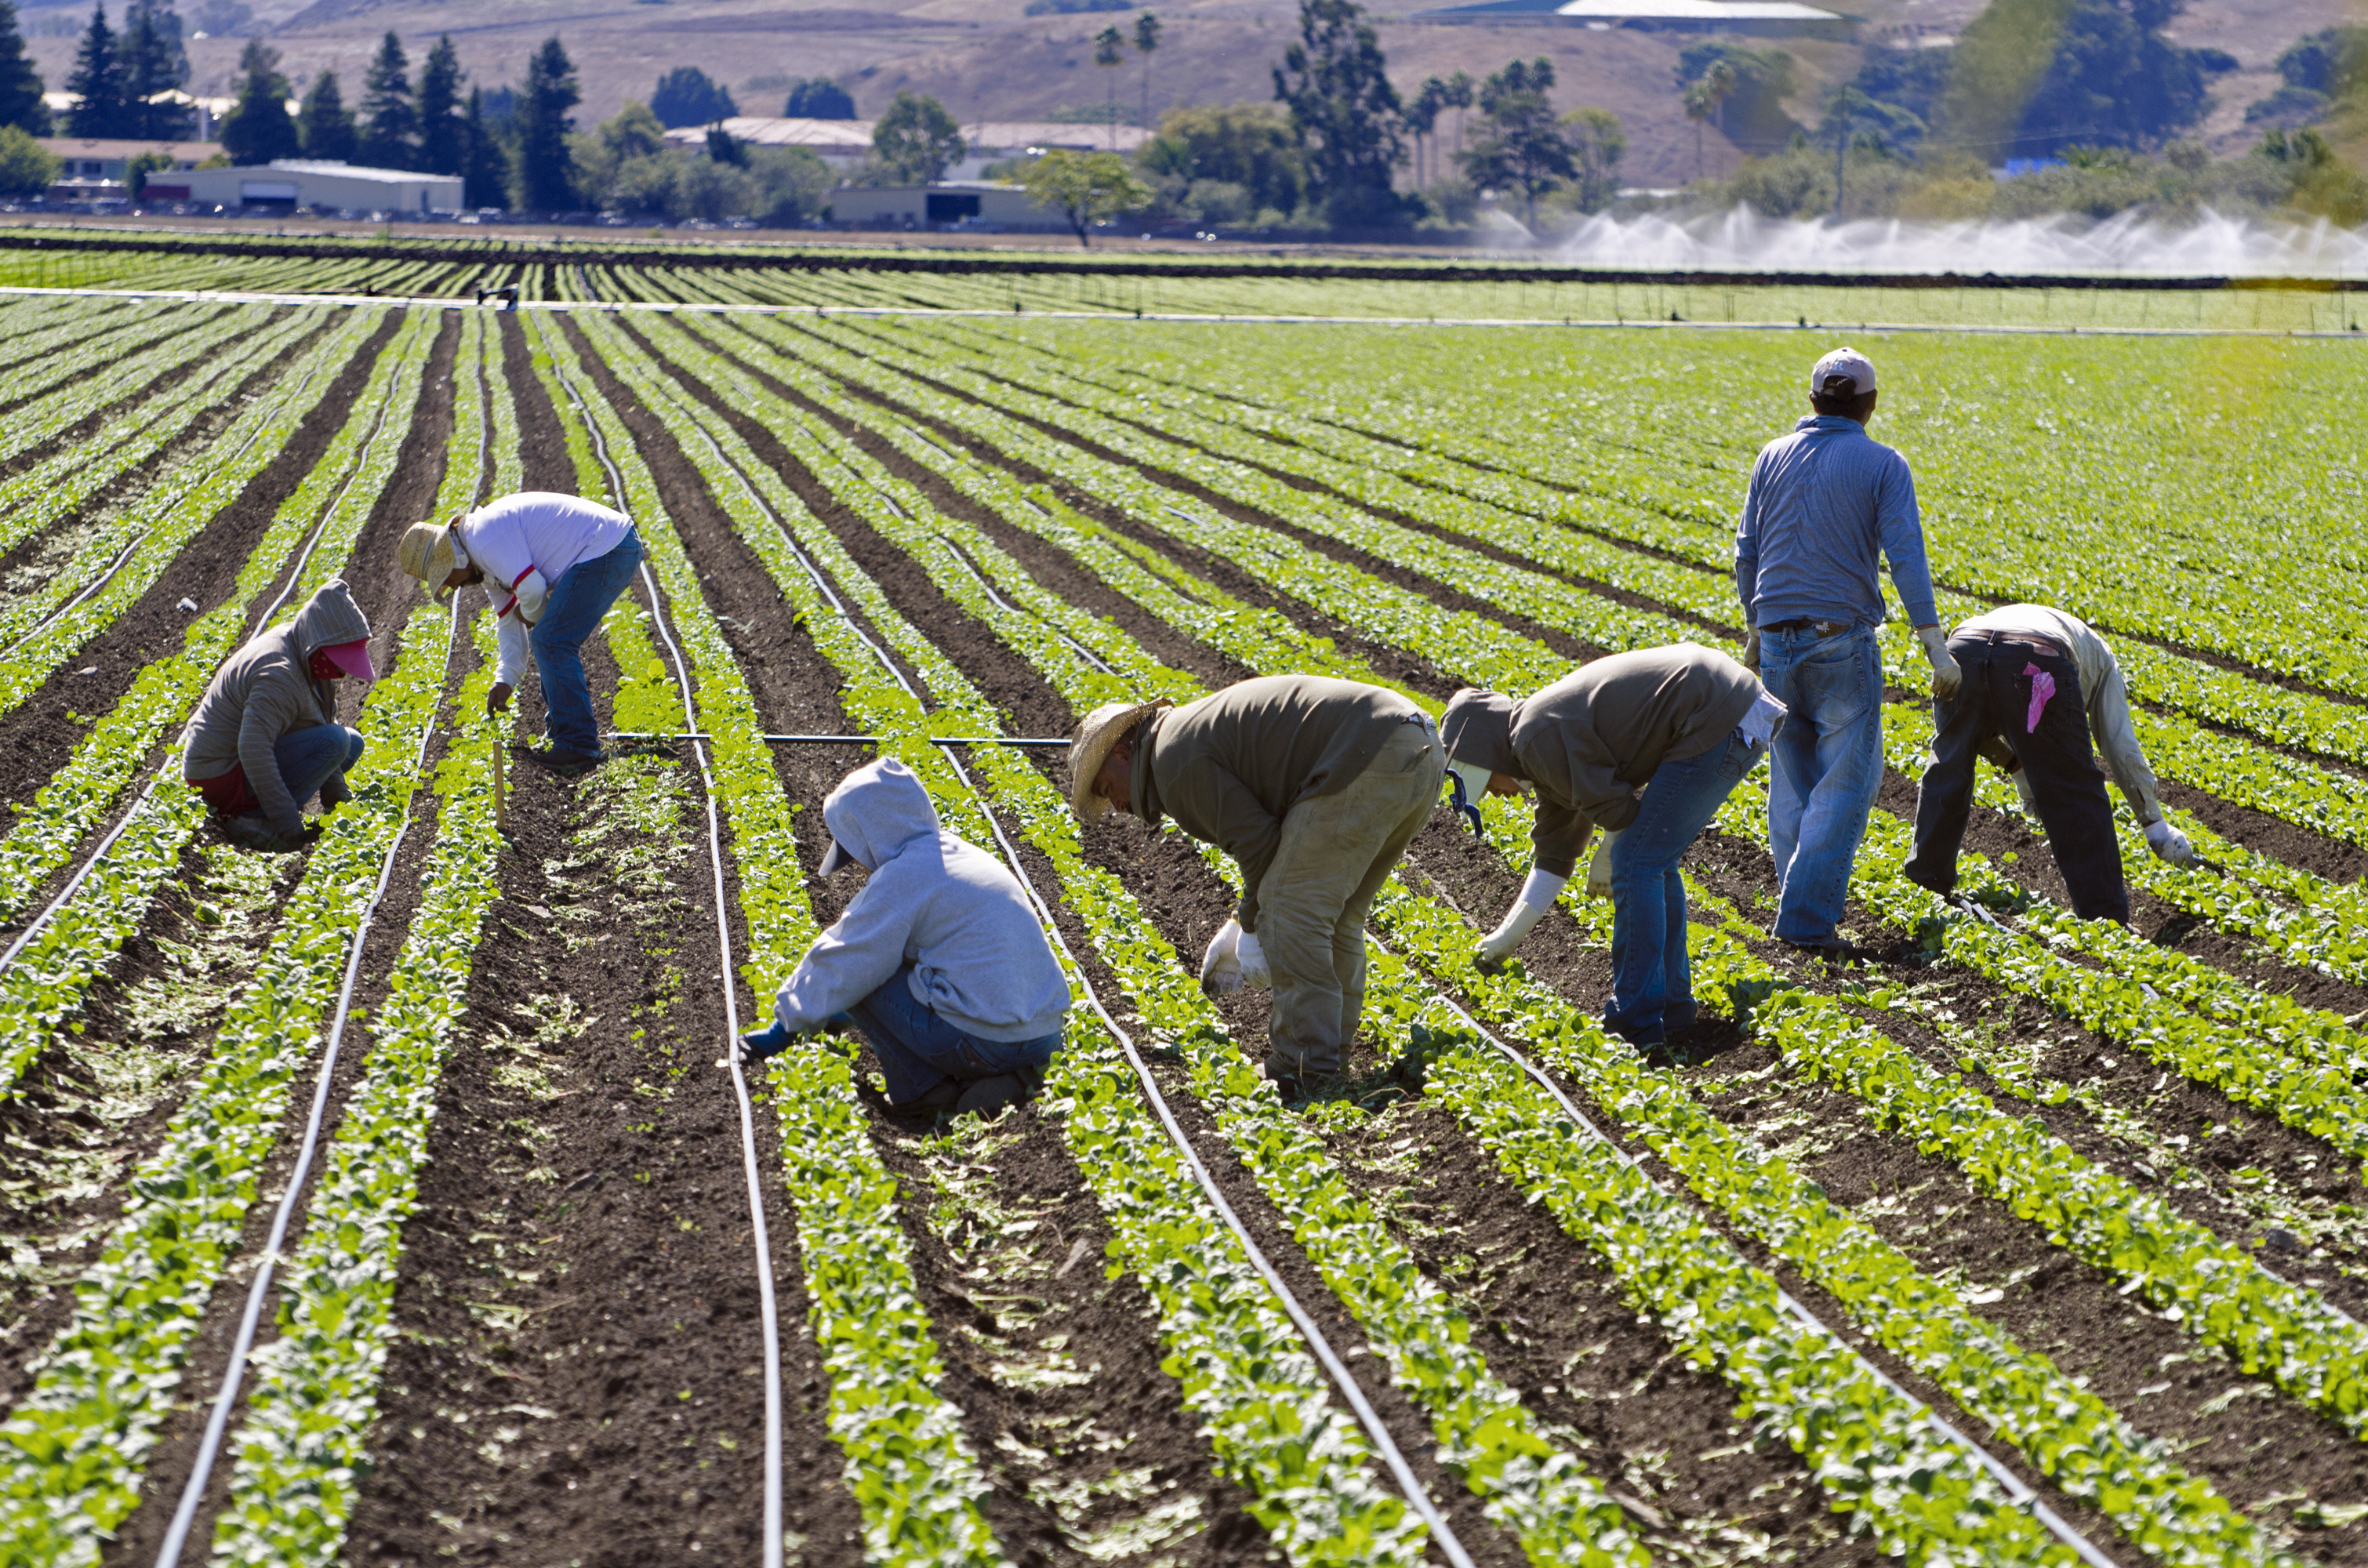  A group of farmers are working in an organic farm field, planting seedlings in the soil.